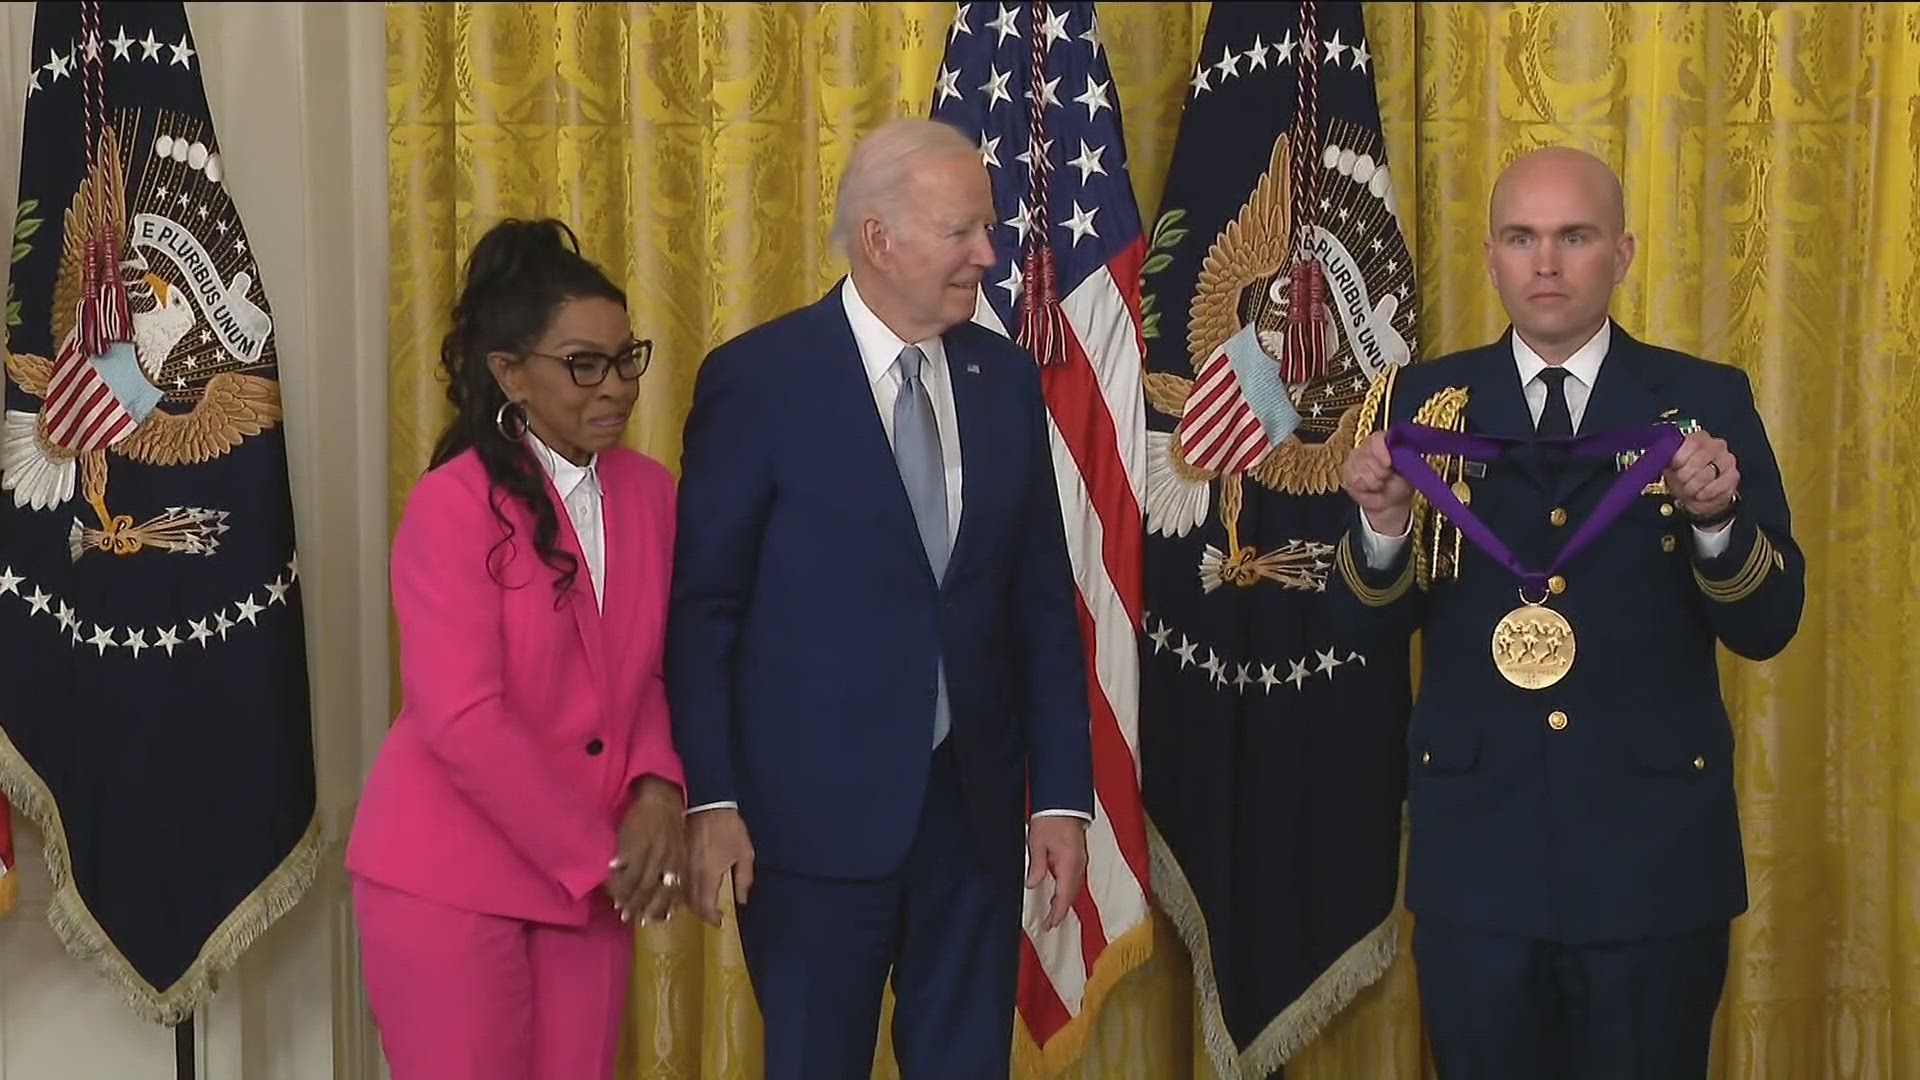 Knight, the “empress of soul,” gave the president a giant hug when he put the medal around her neck.